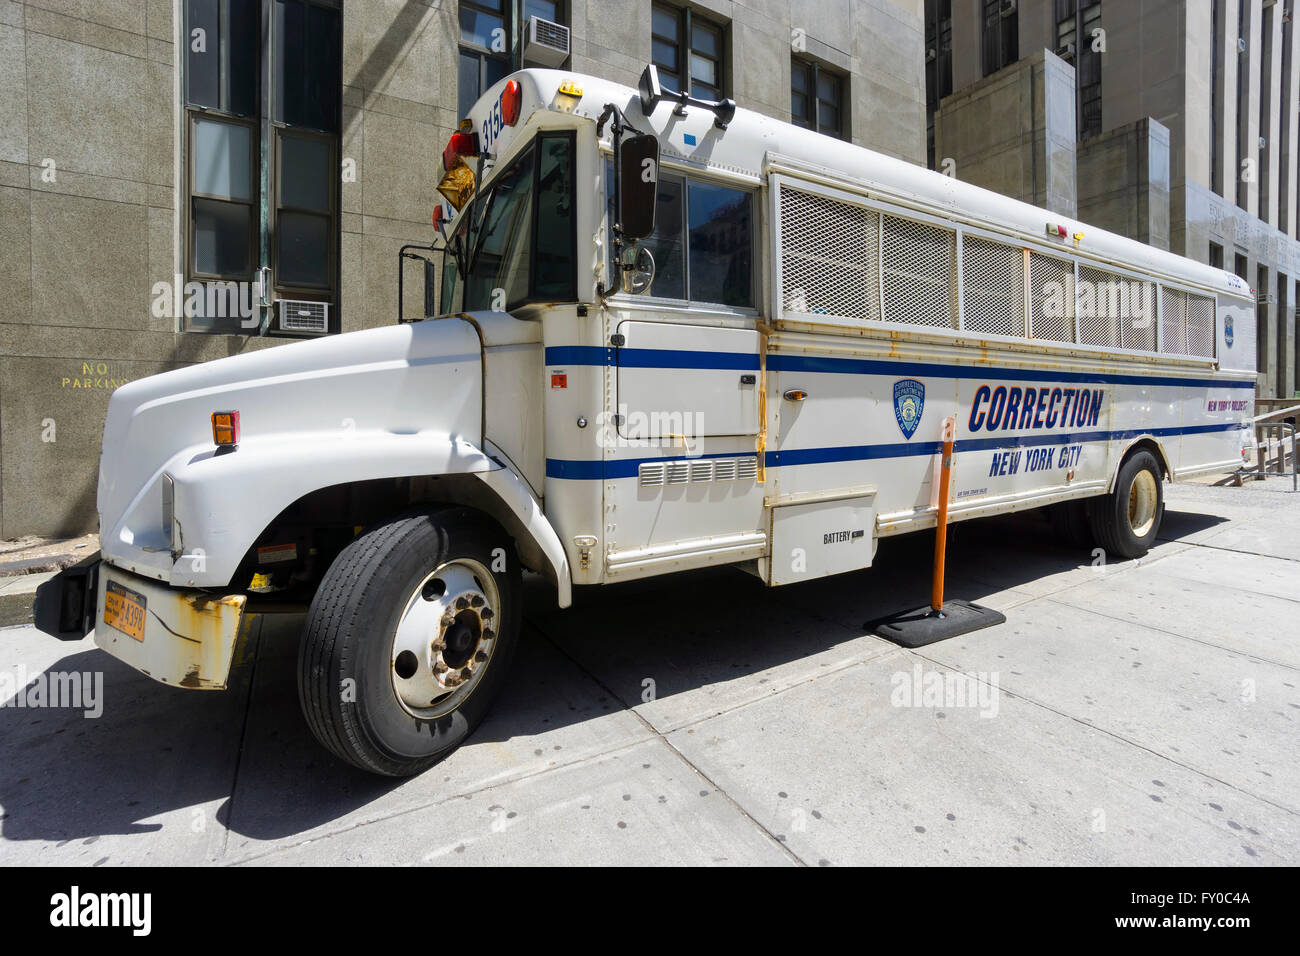 NEW YORK CITY- JUNE 13, 2015: Correction Department bus parked in front of New York City Criminal Court Stock Photo